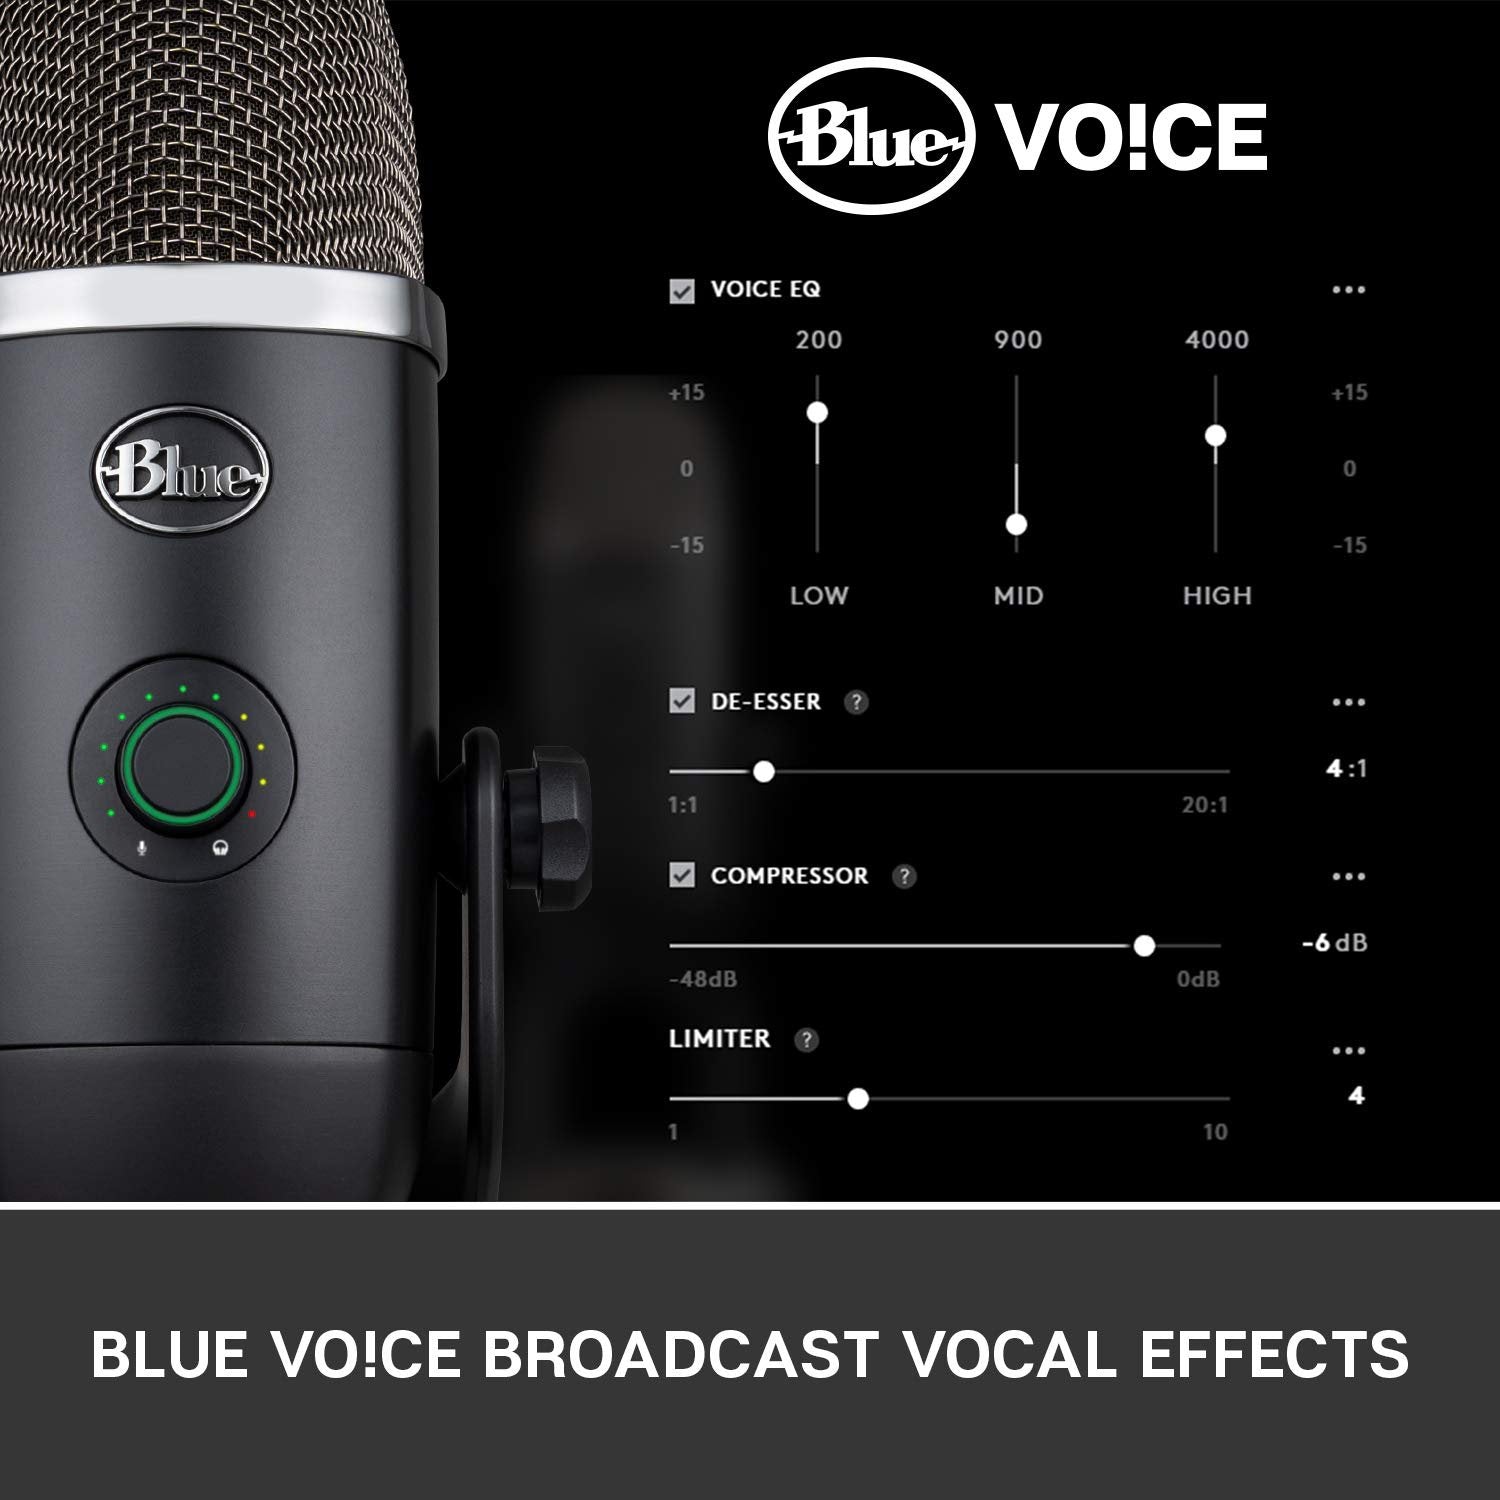 Logitech for Creators Blue Yeti X USB Microphone for Gaming, Streaming, Podcasting, Twitch, YouTube, Discord, Recording for PC and Mac, 4 Polar Patterns, Studio Quality Sound, Plug & Play-Dark Grey